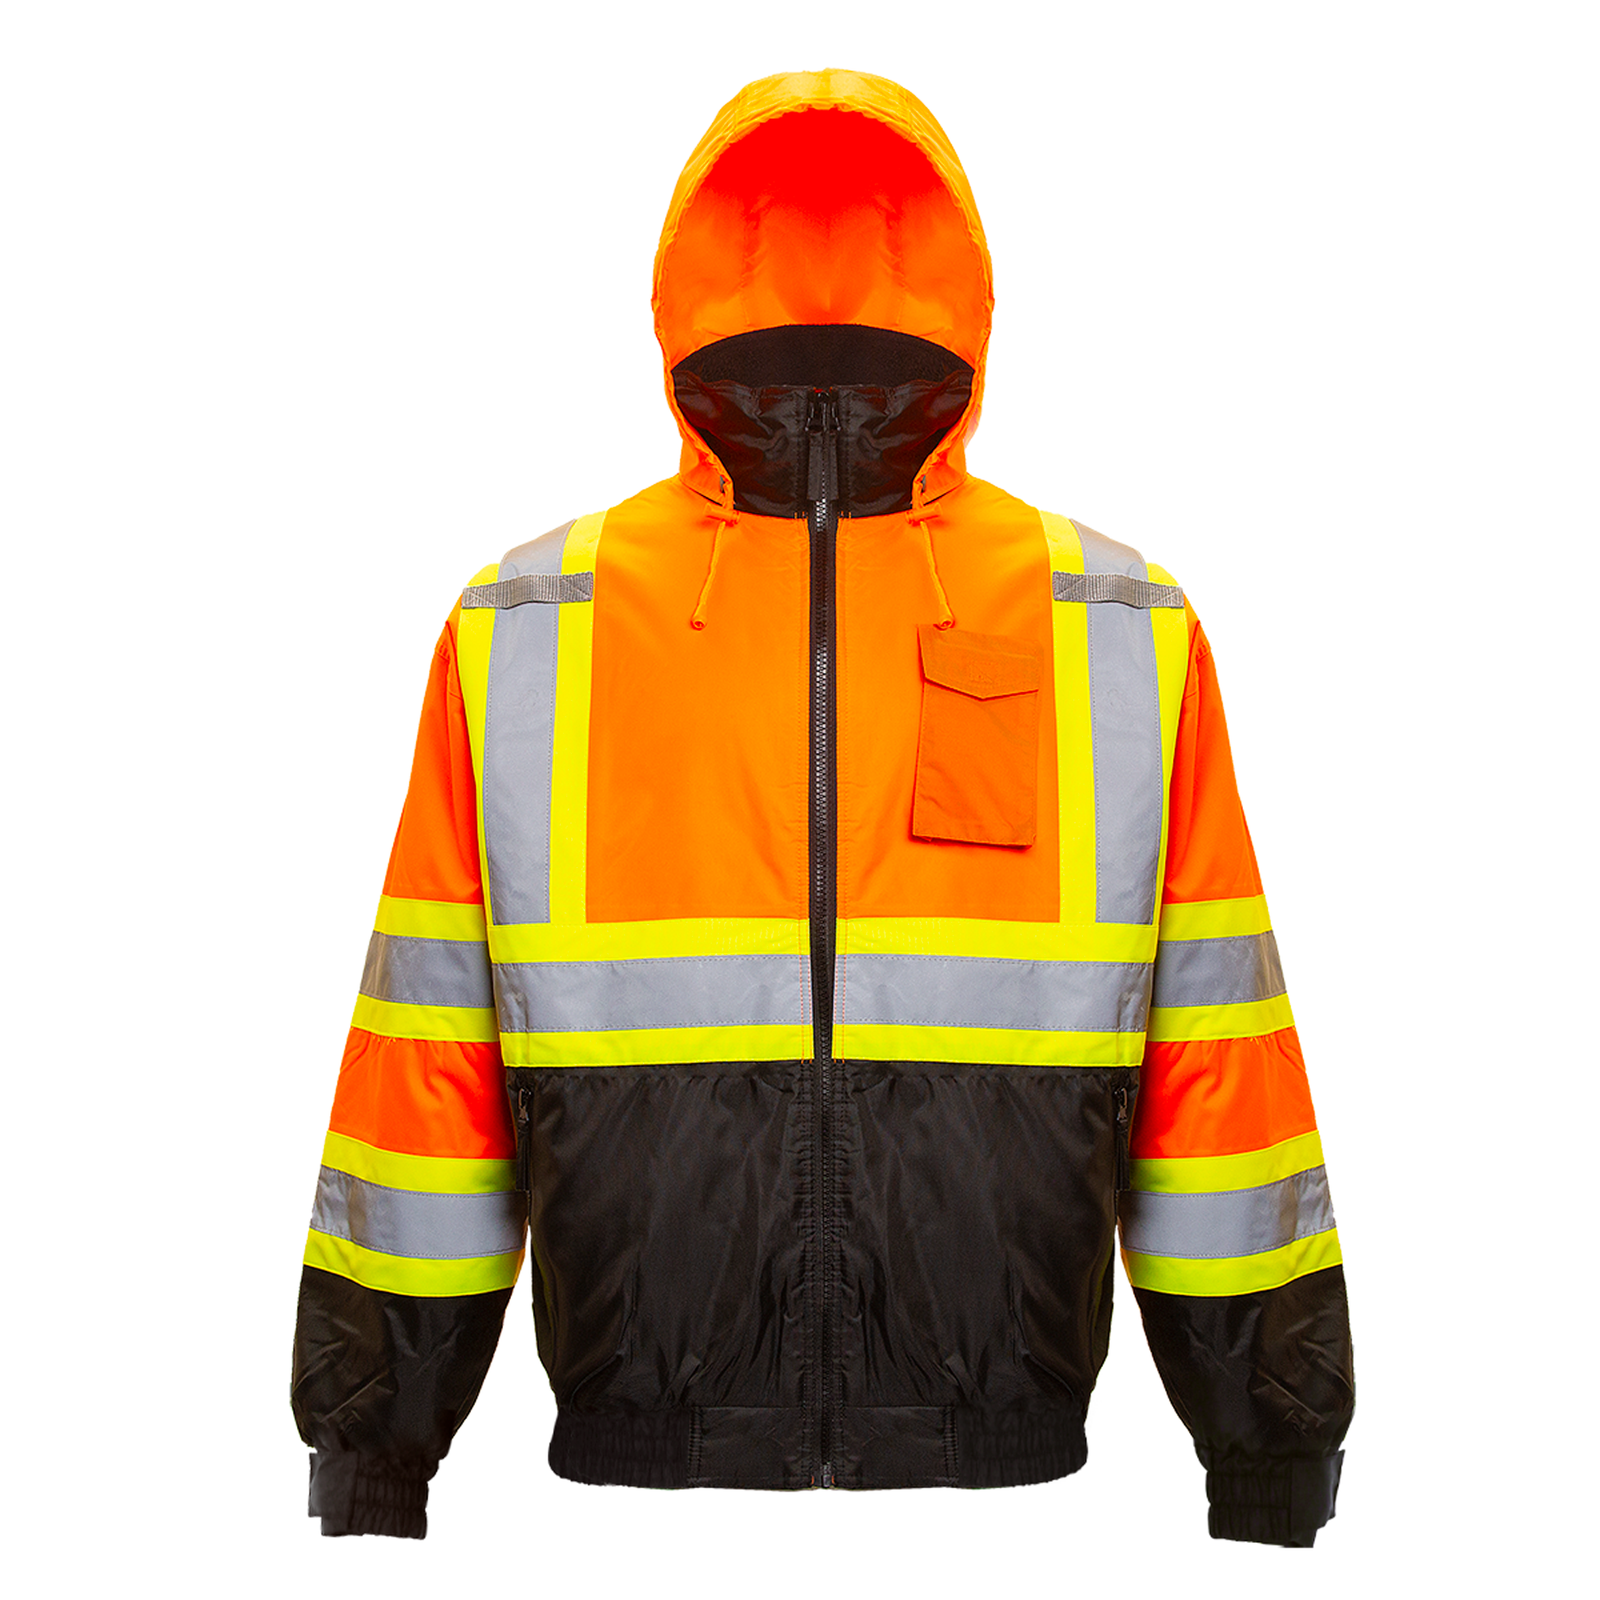 Orange and back JORESTECH hi vis two tone safety bomber jacket with reflective stripes and hoodie, class 3 type R